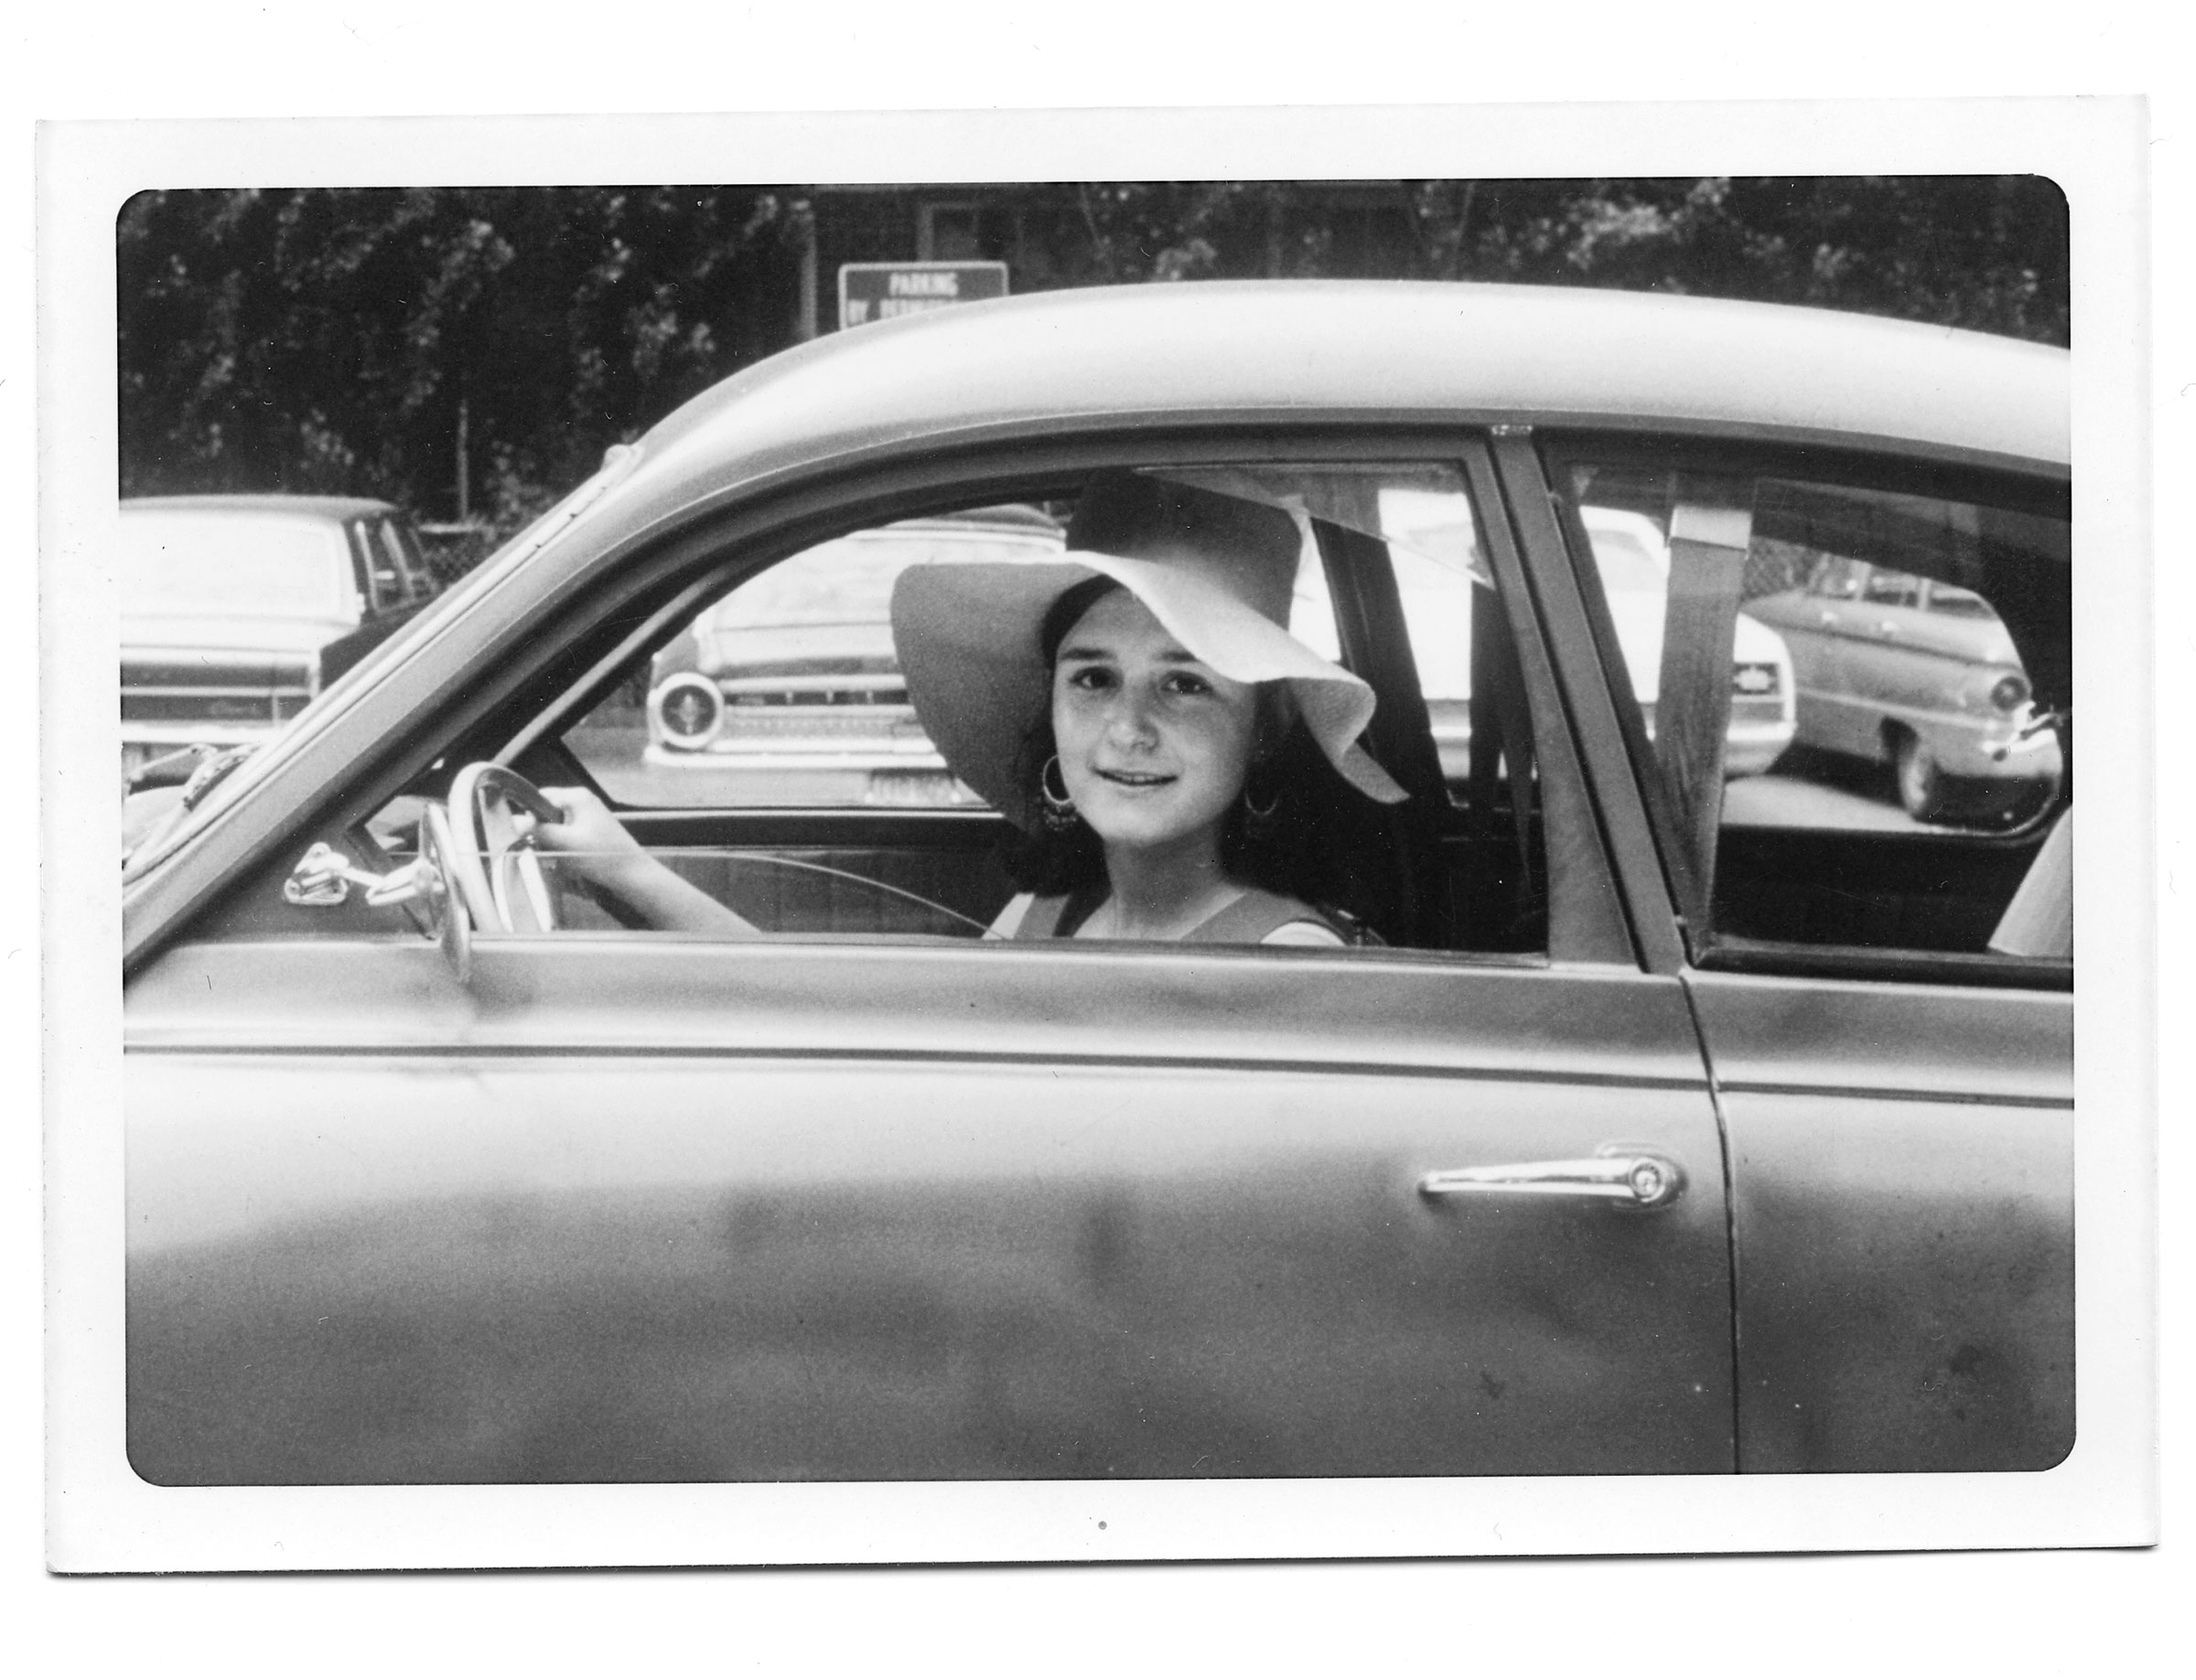 Sherry Turkle in her roadster at Radcliffe College graduation, June 1970 (Courtesy of Sherry Turkle)